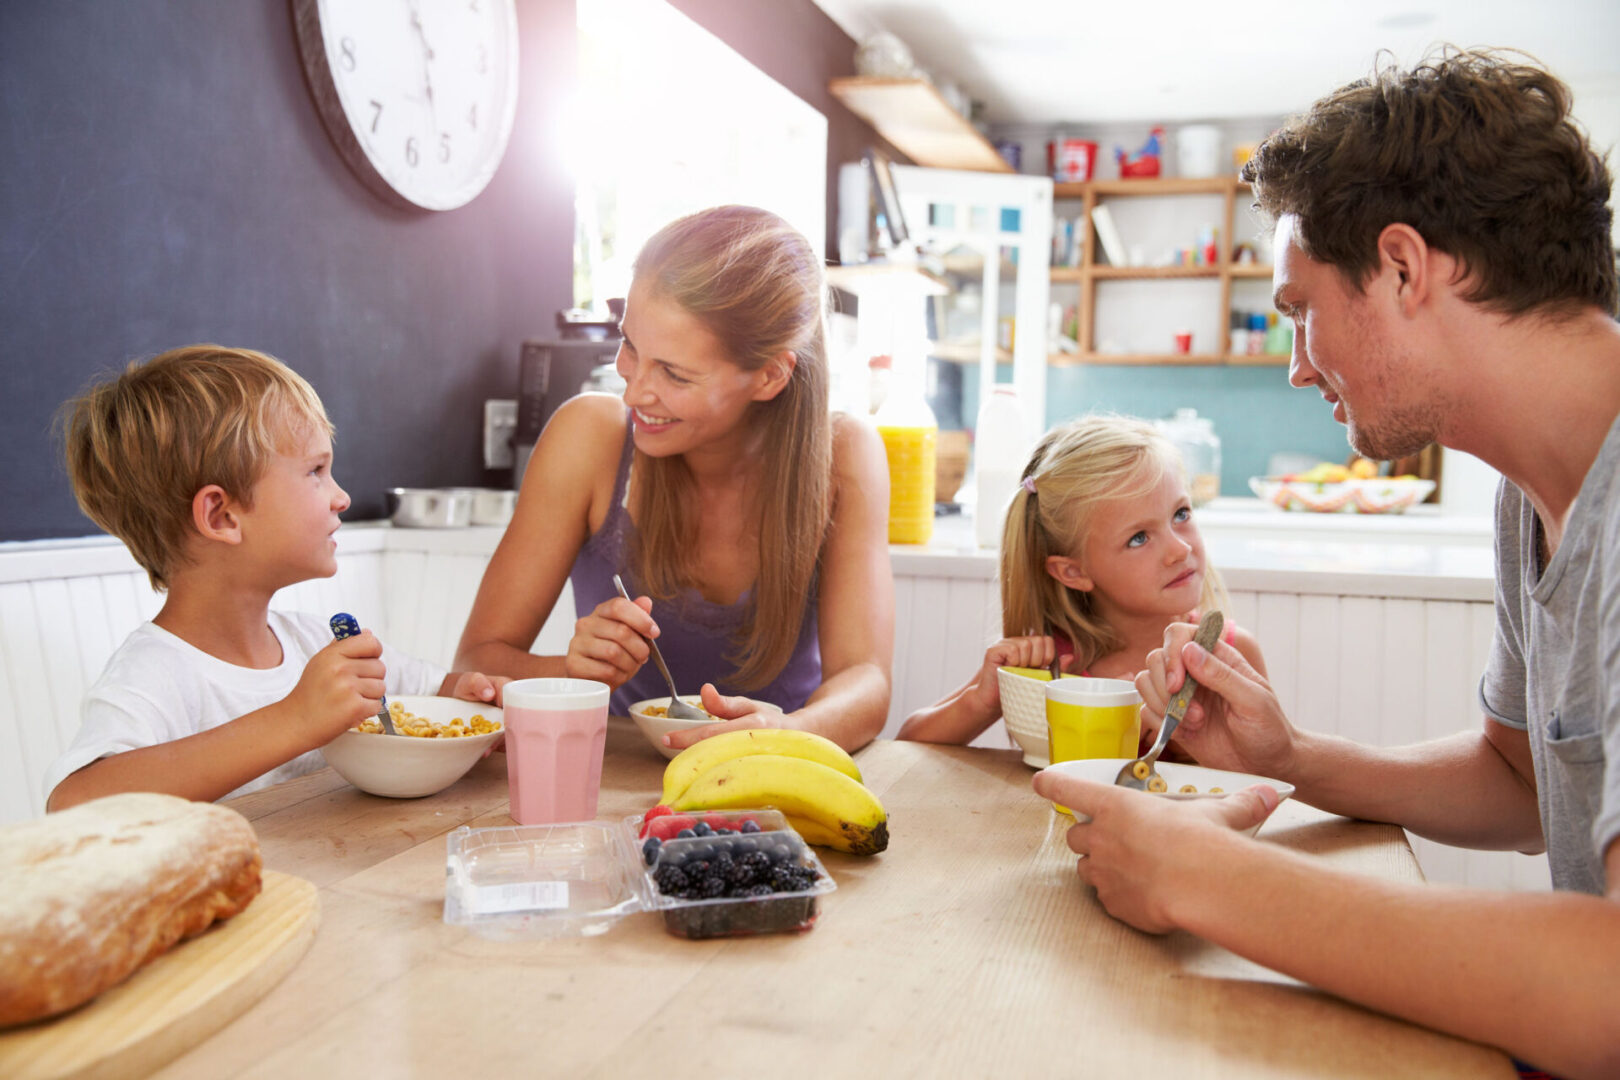 A family eating cereal and fruit at the table.